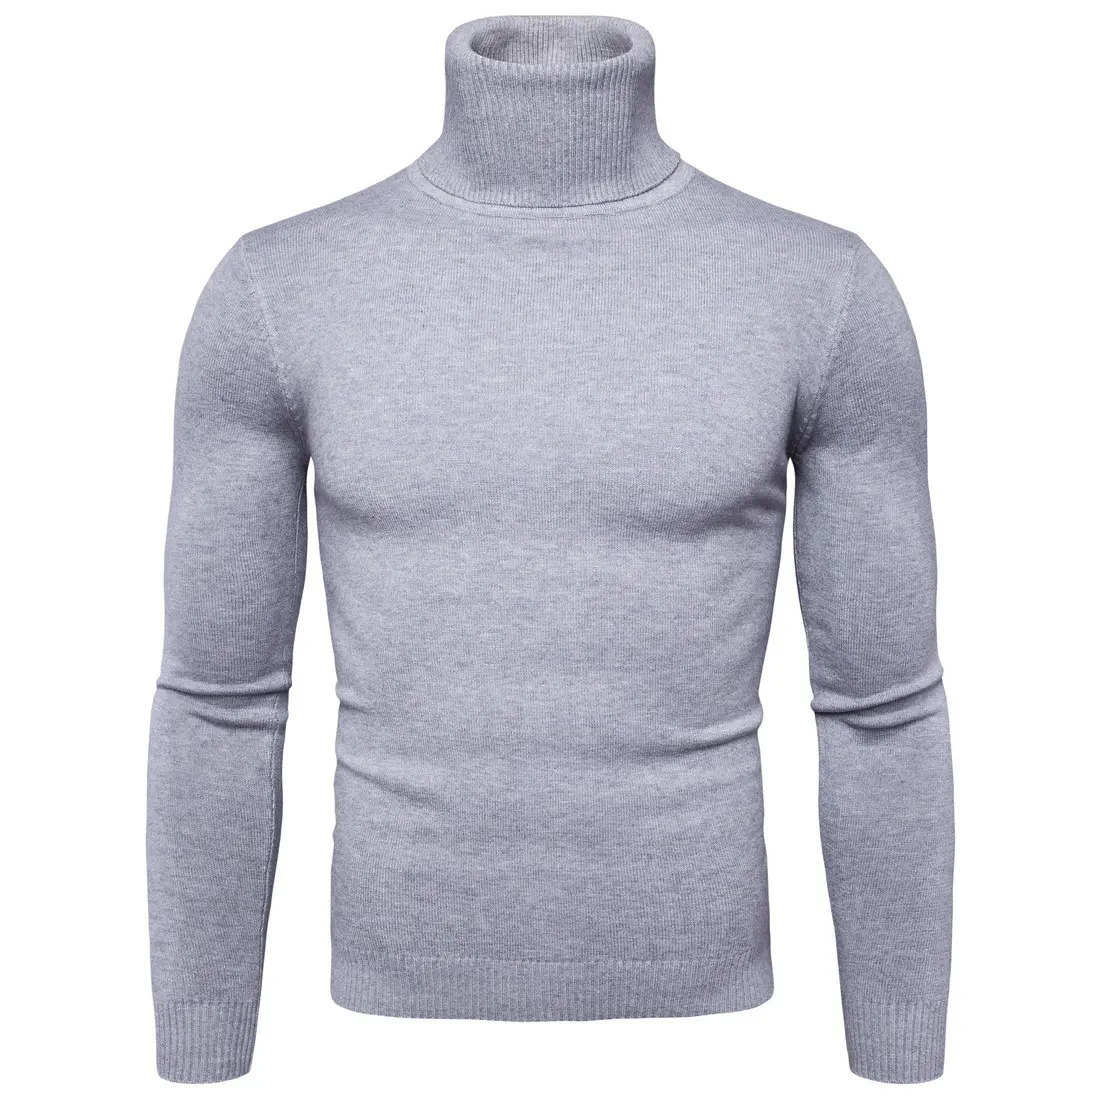 OEM factory Turtleneck Men's Knitted Sweater Autumn Simple Solid Color Lapel Pullover Slim Bottoming Shirt Basic Sweater